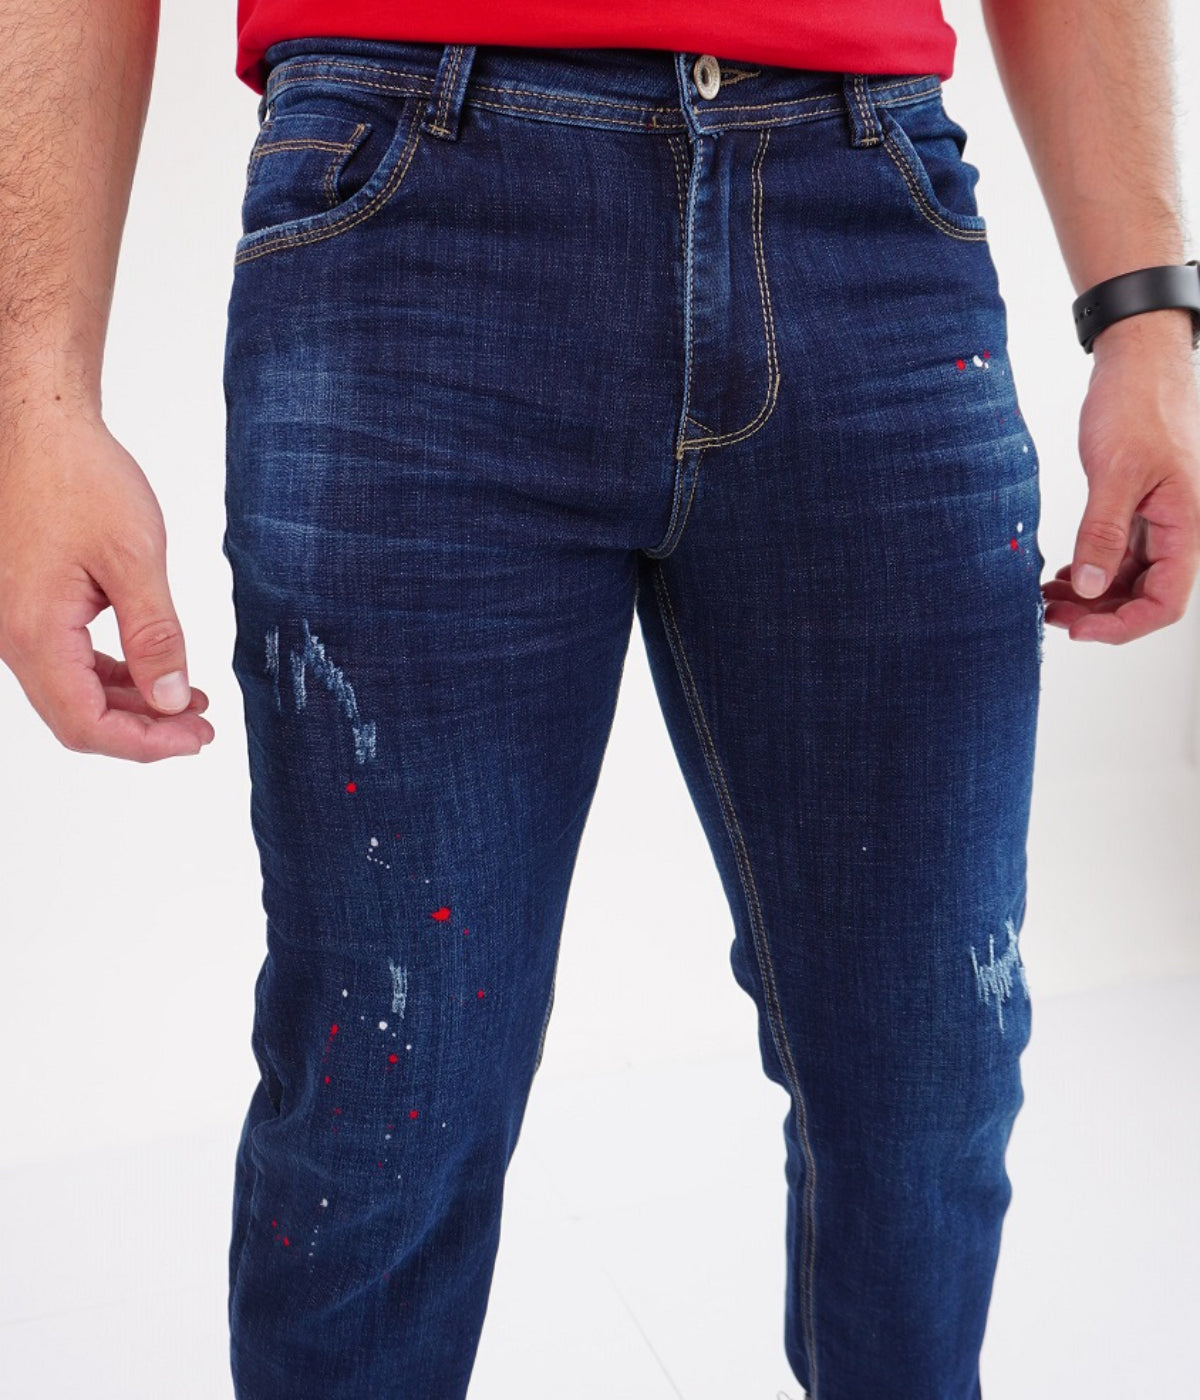 Jeans Colombiano Hombre 4717